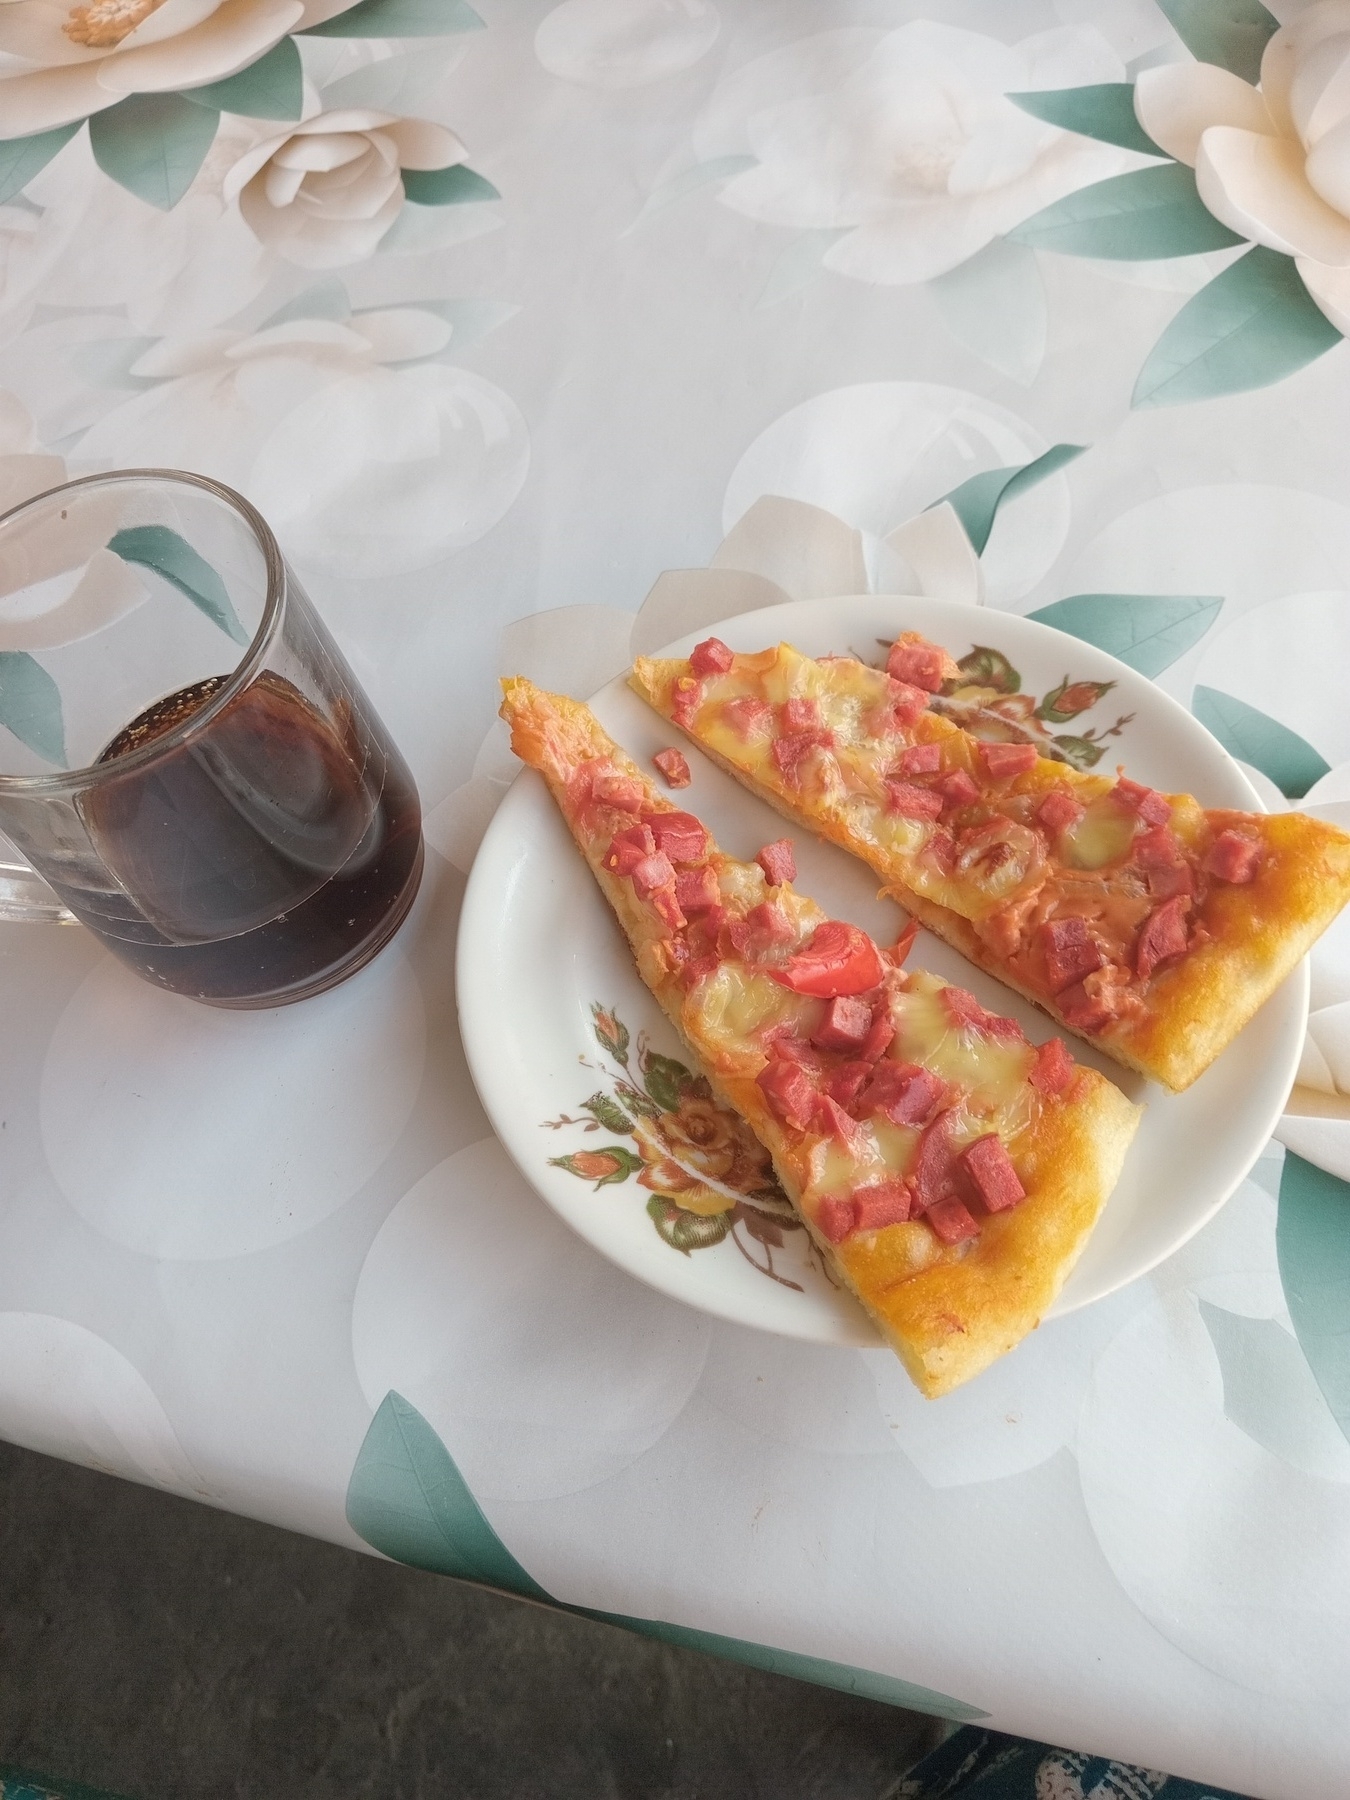 a small glass of mug of coca-cola on the left, plate with two small pieces of pizza on the right 